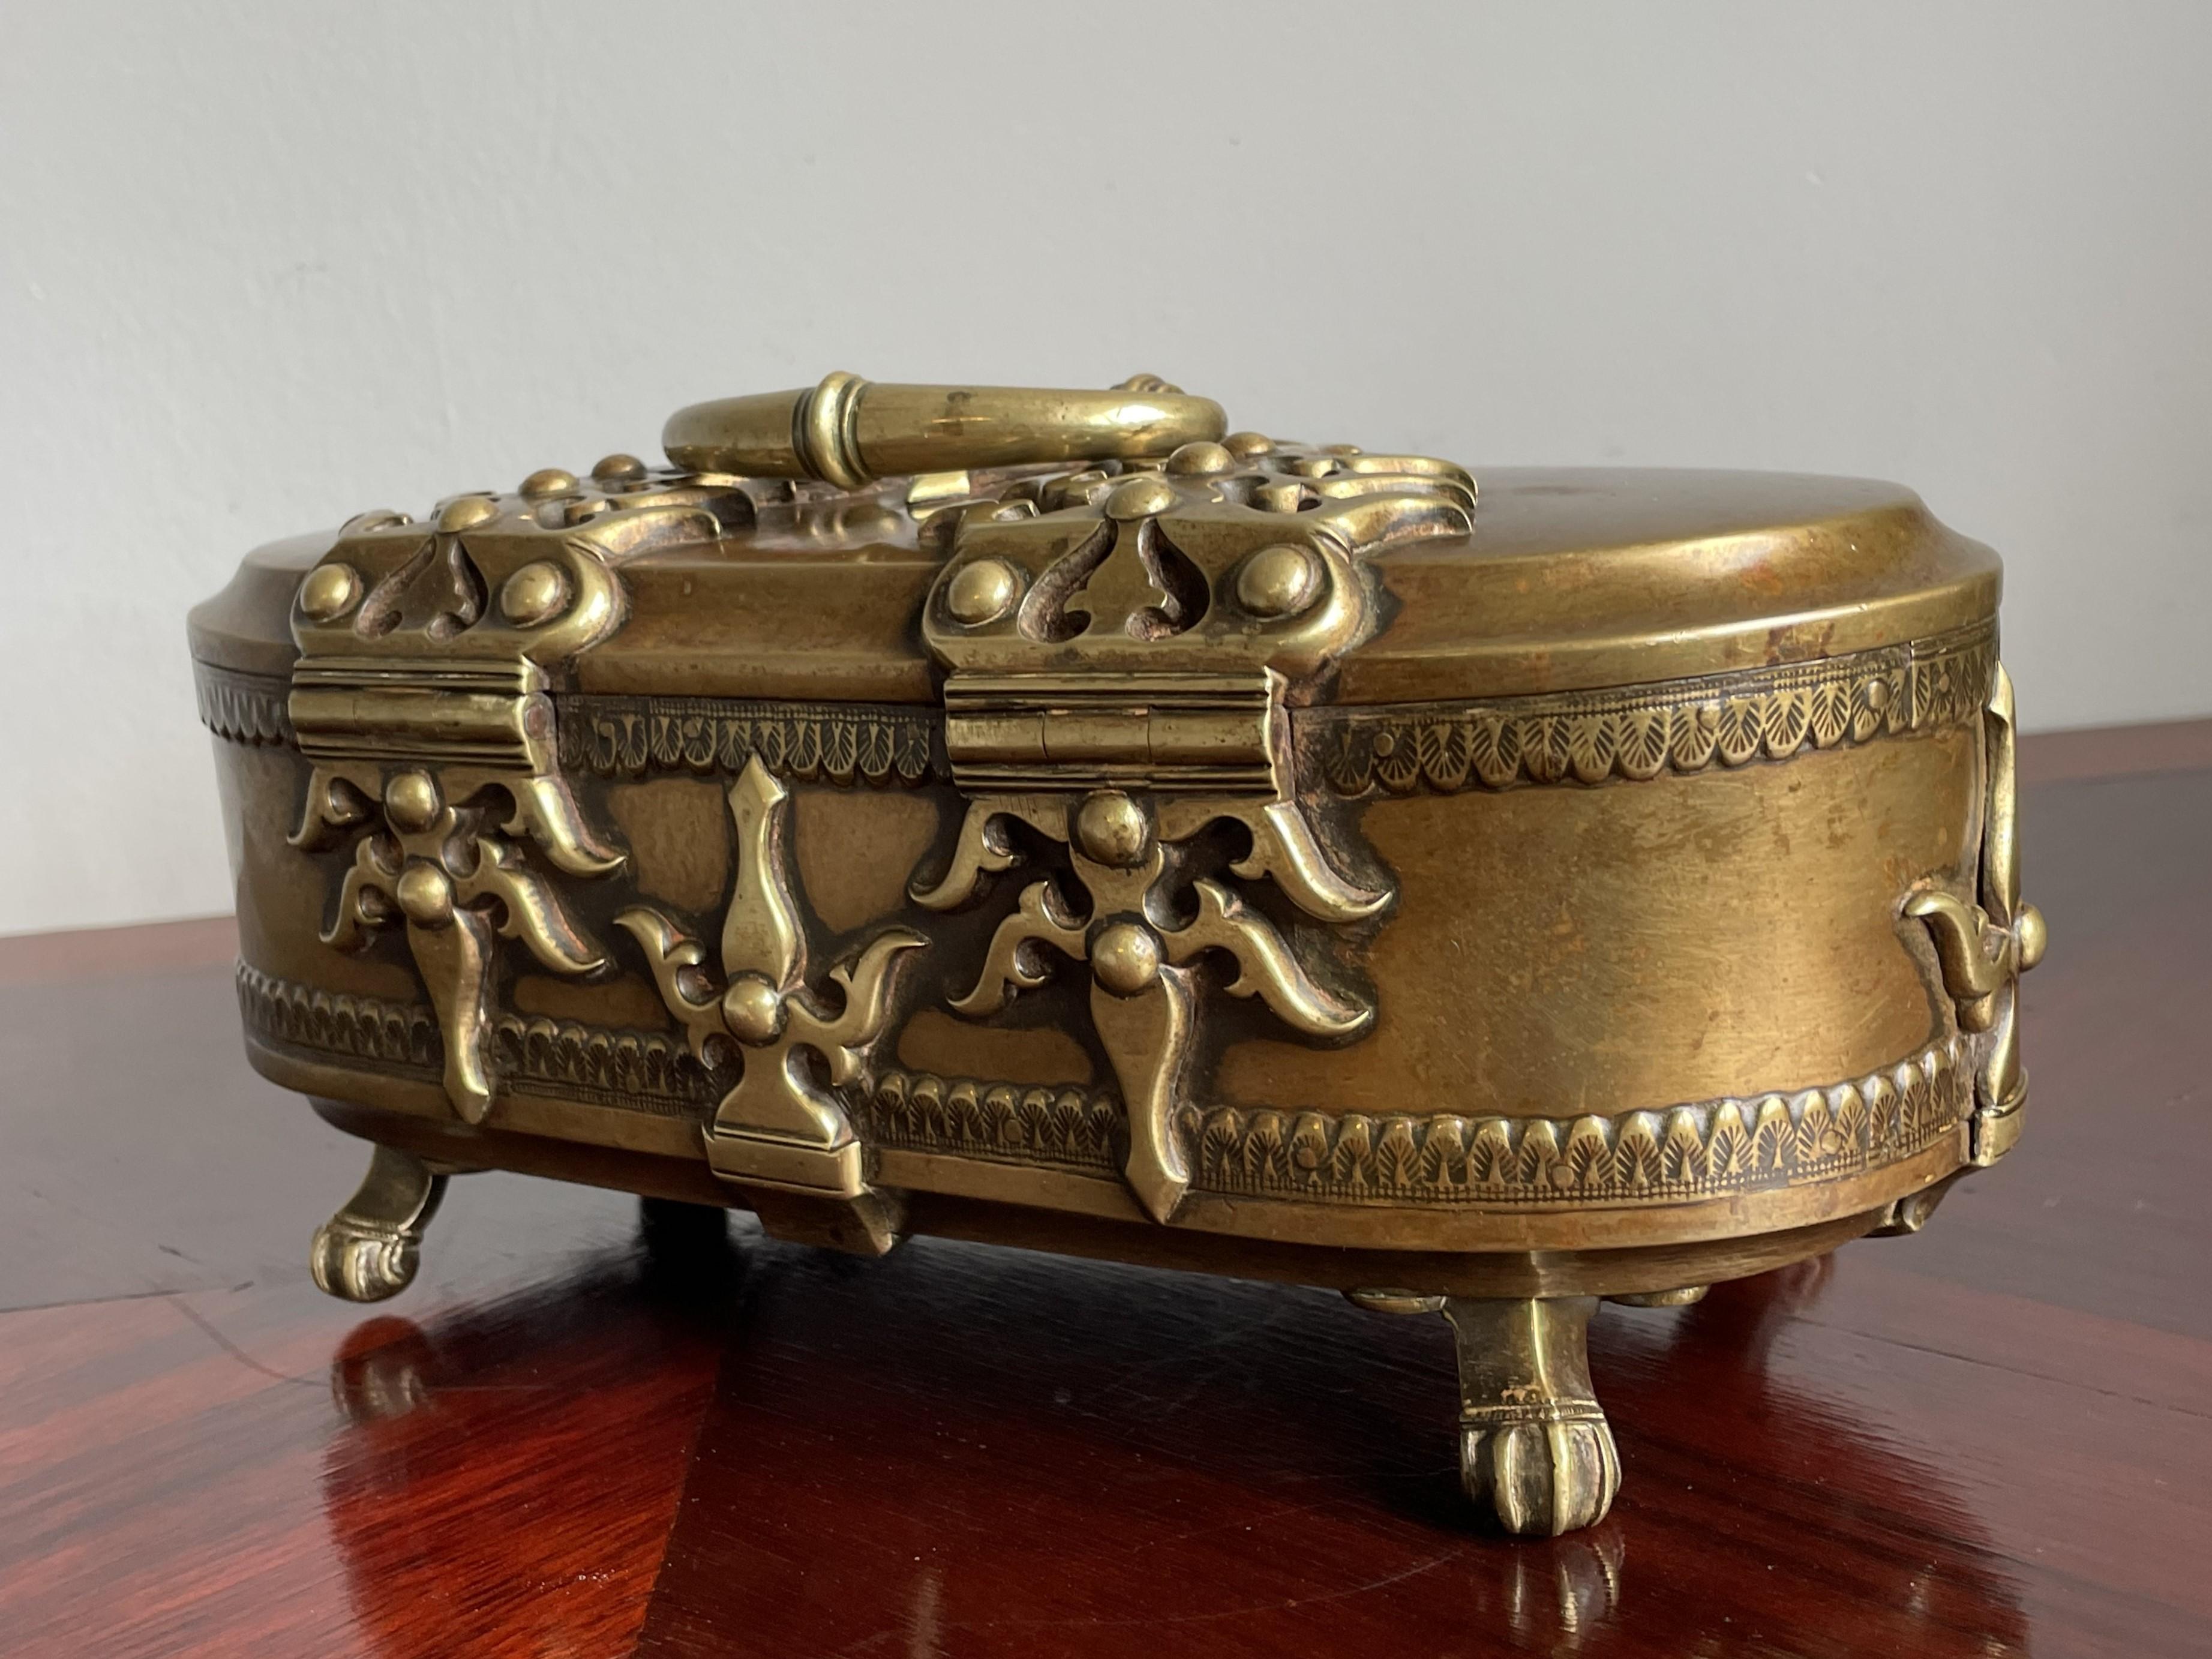 Cast Unique & Stunning 1800s Bronze & Brass Betel Nut Box Museum Quality & Condition For Sale